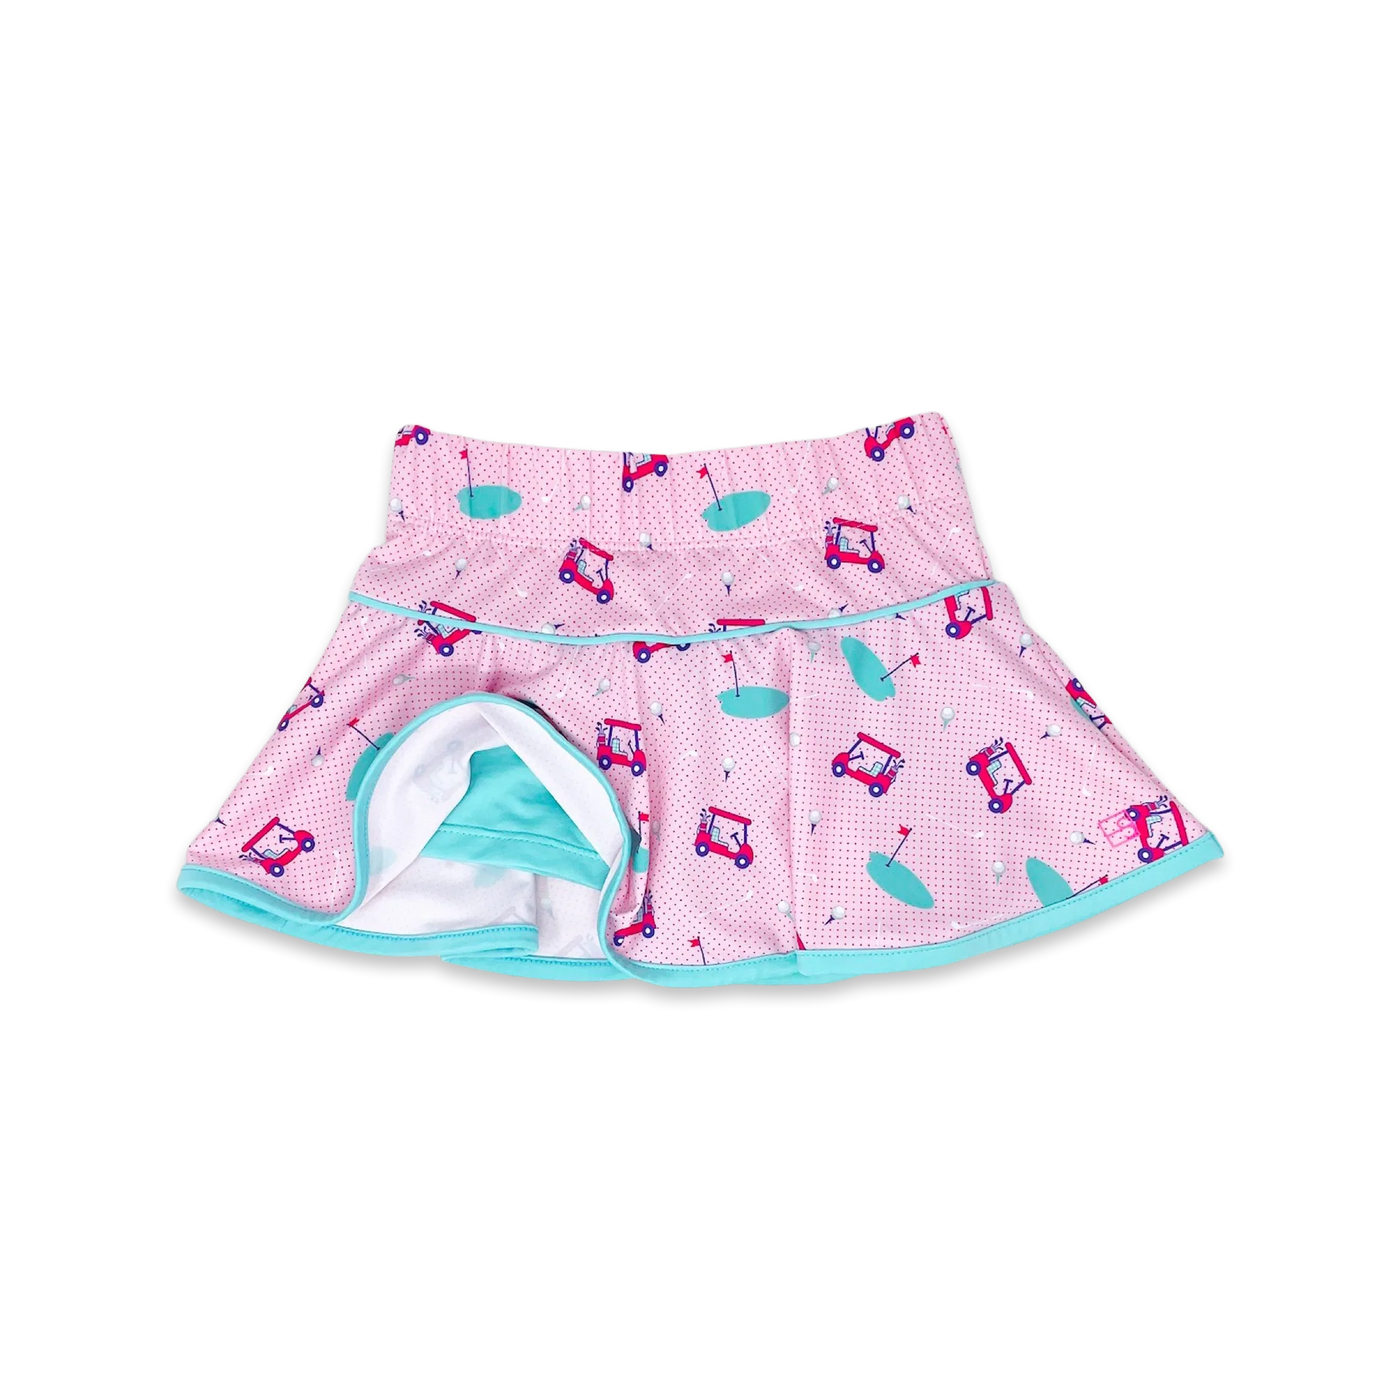 Quinn Skort- Hole in One, Totally Turquoise